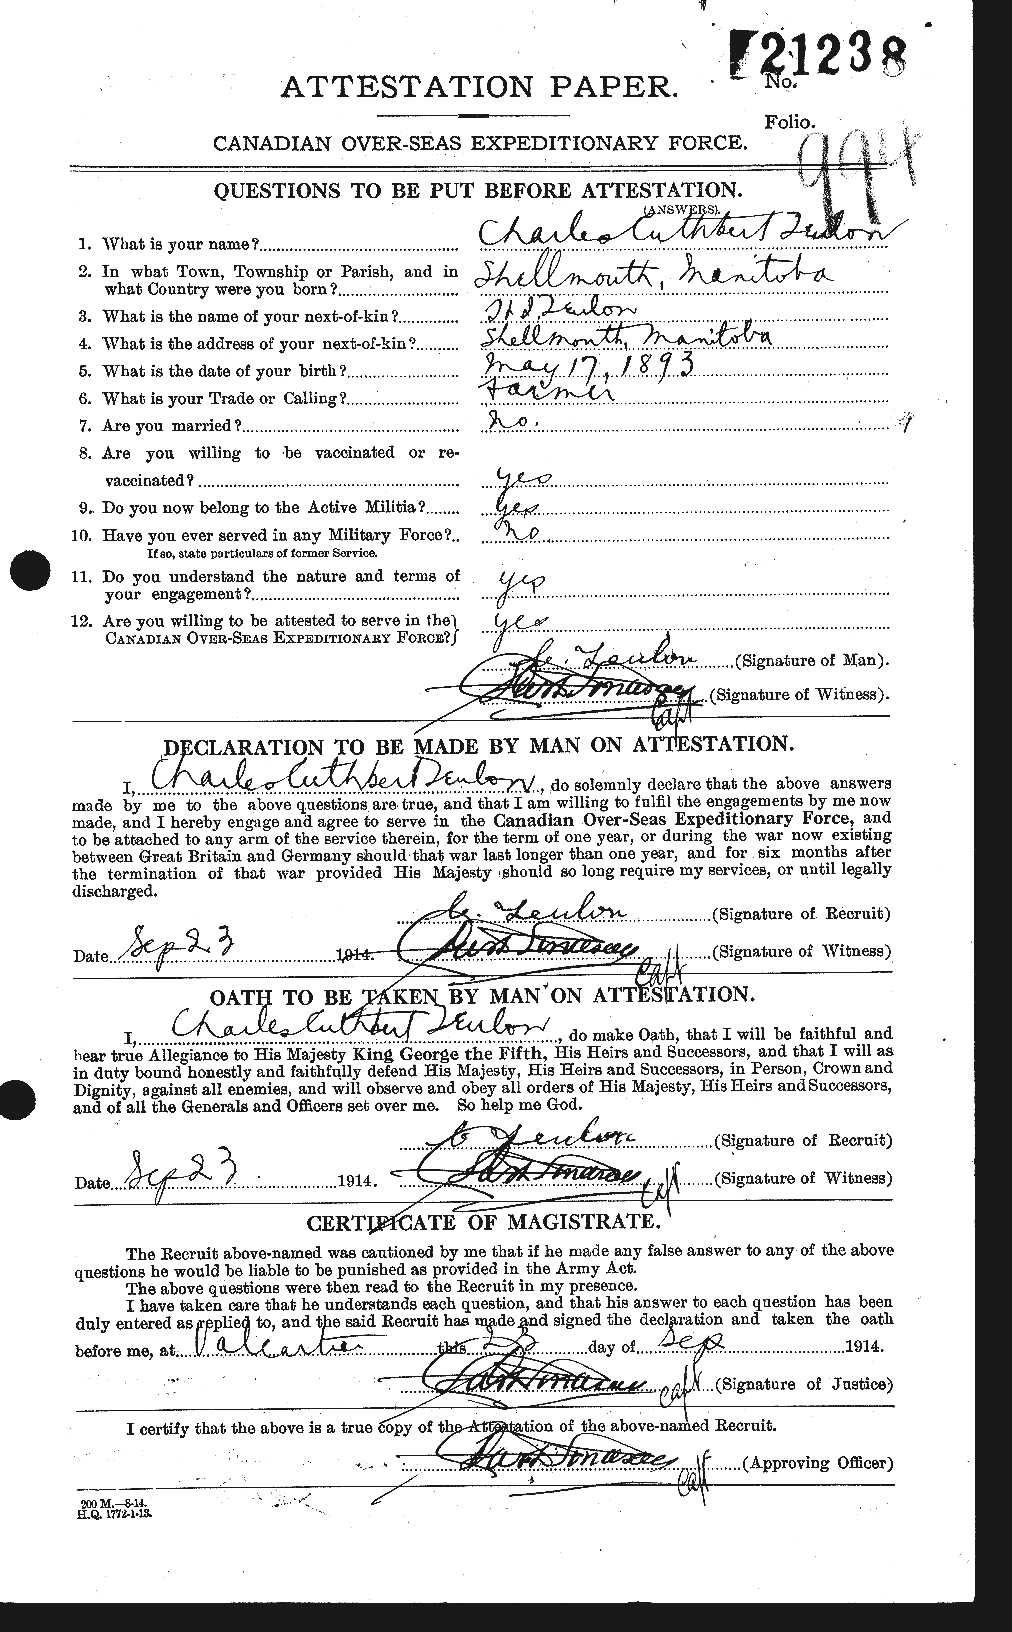 Personnel Records of the First World War - CEF 631293a